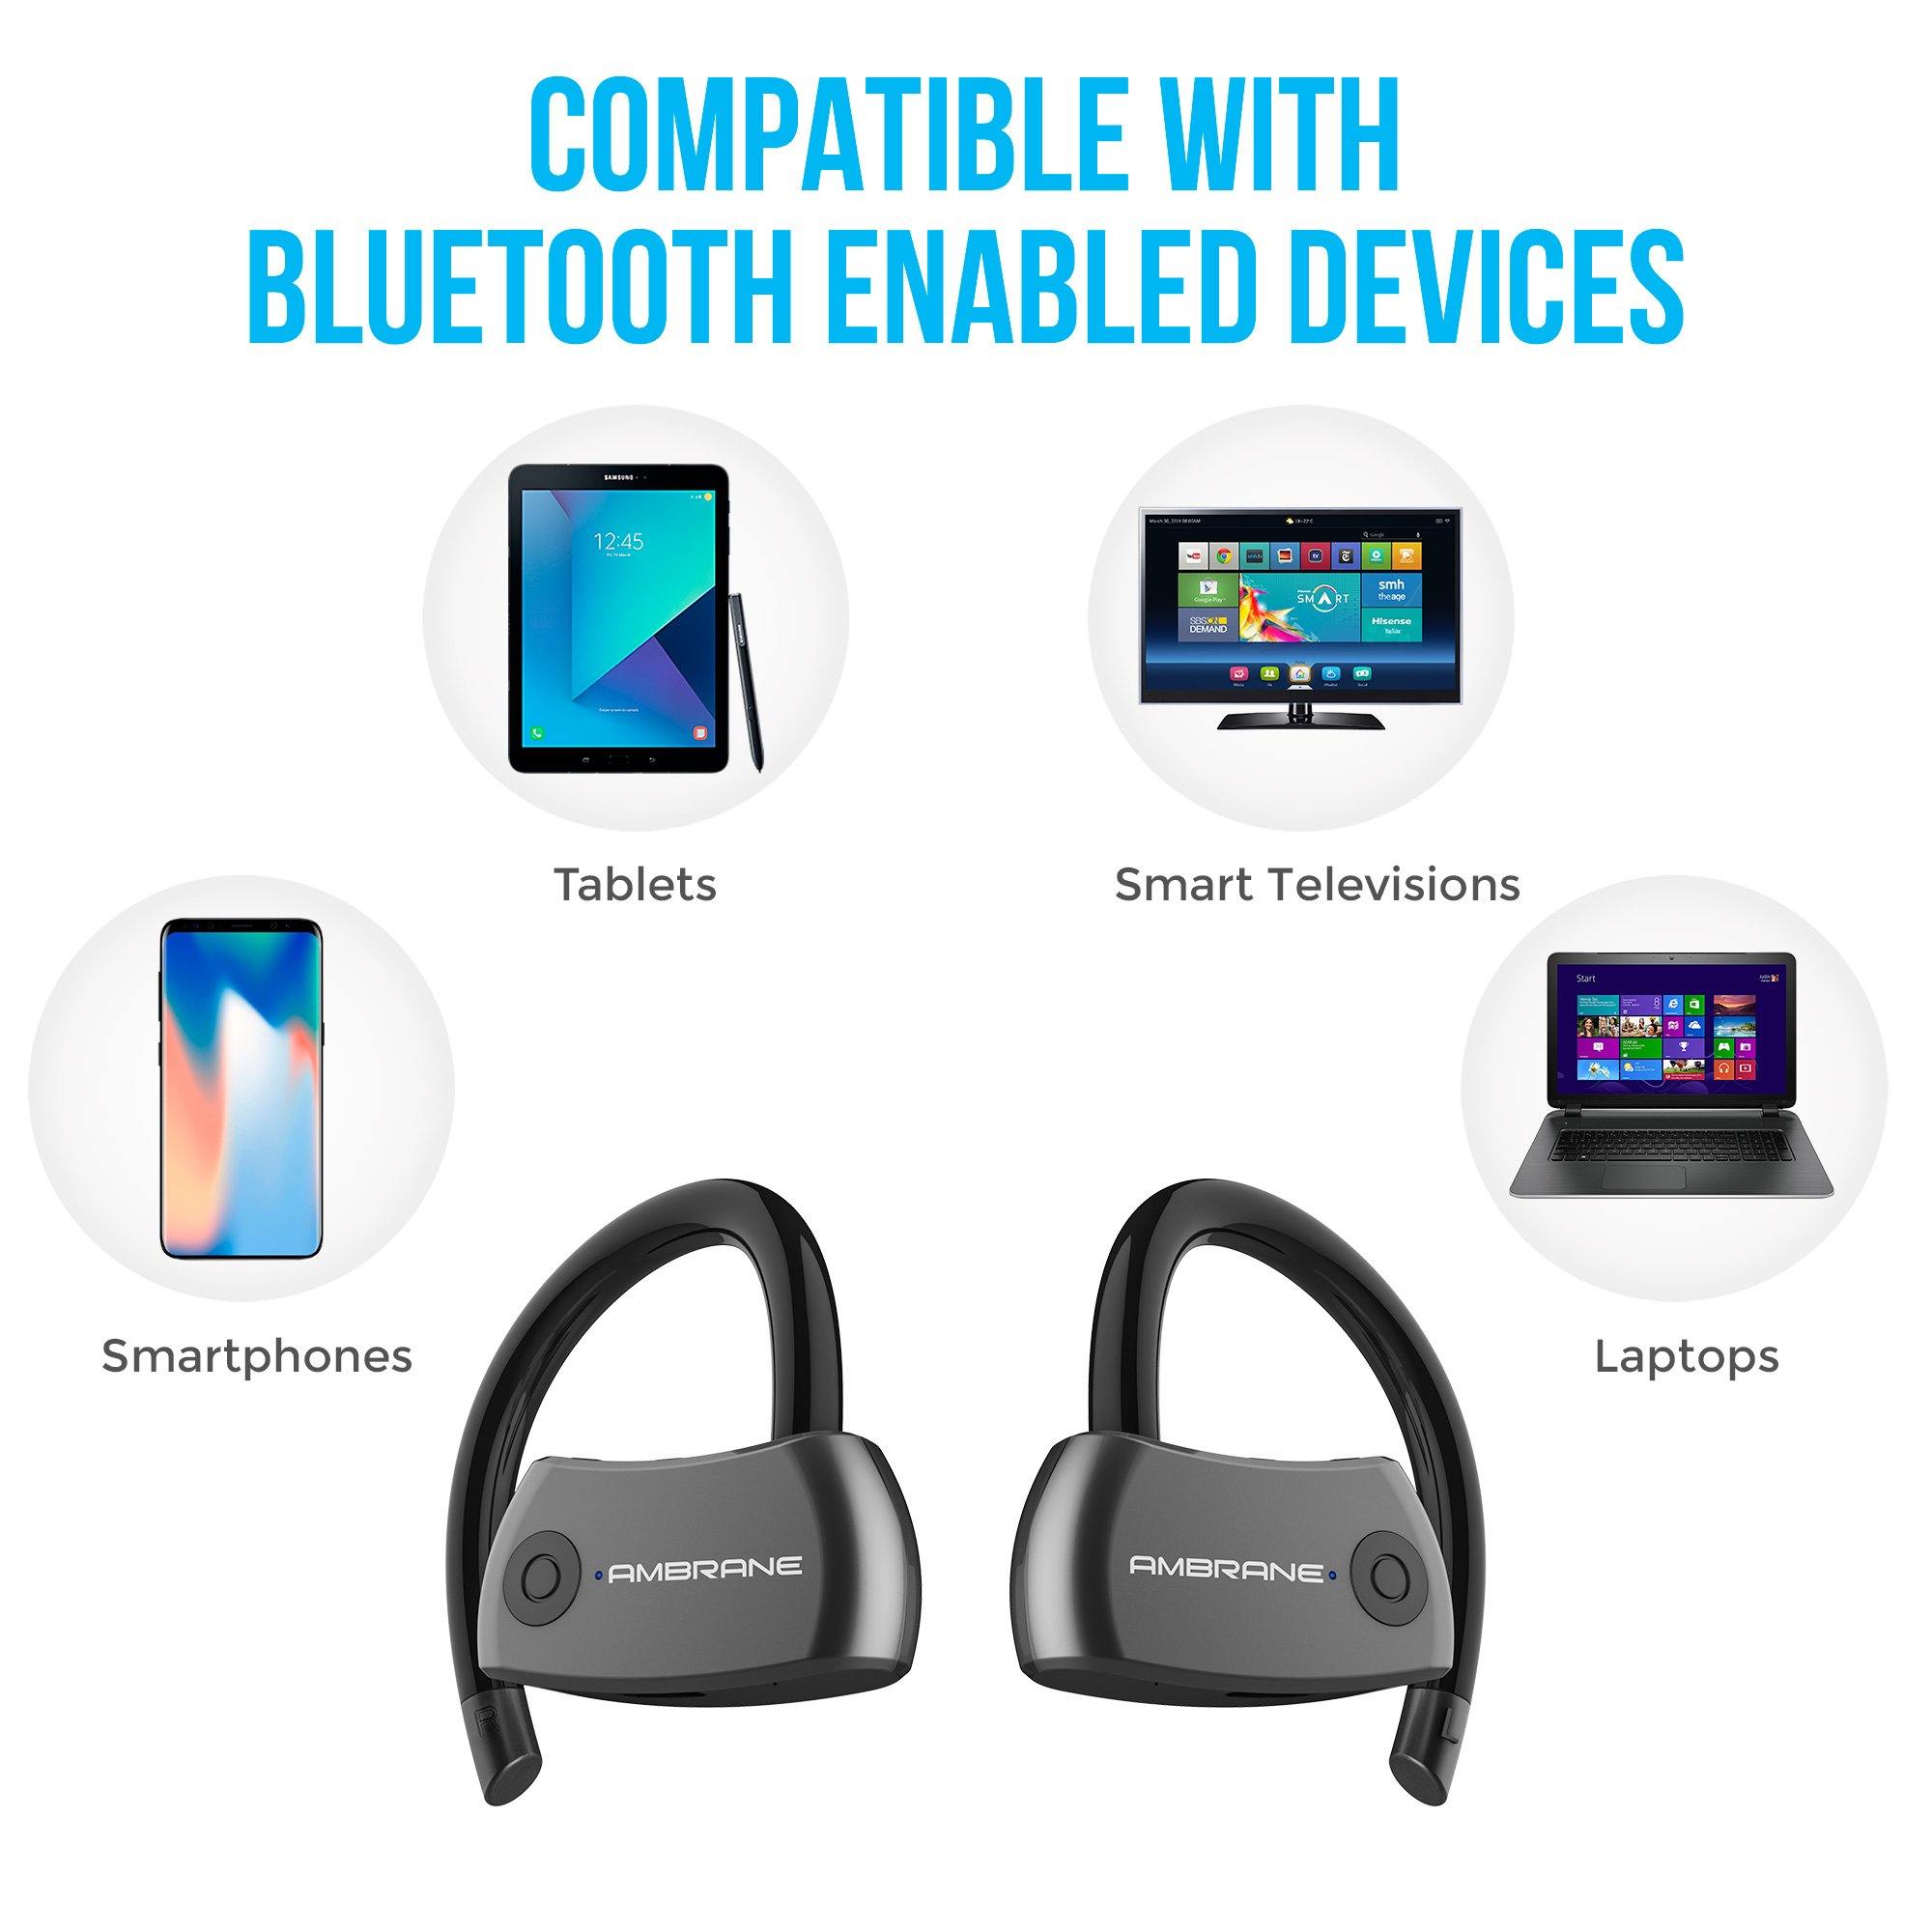 Ambrane AERO Smart Voice Assistant Enabled Around The Ear True Wireless Earbuds (ATW-20, Black) - AmbraneIndia